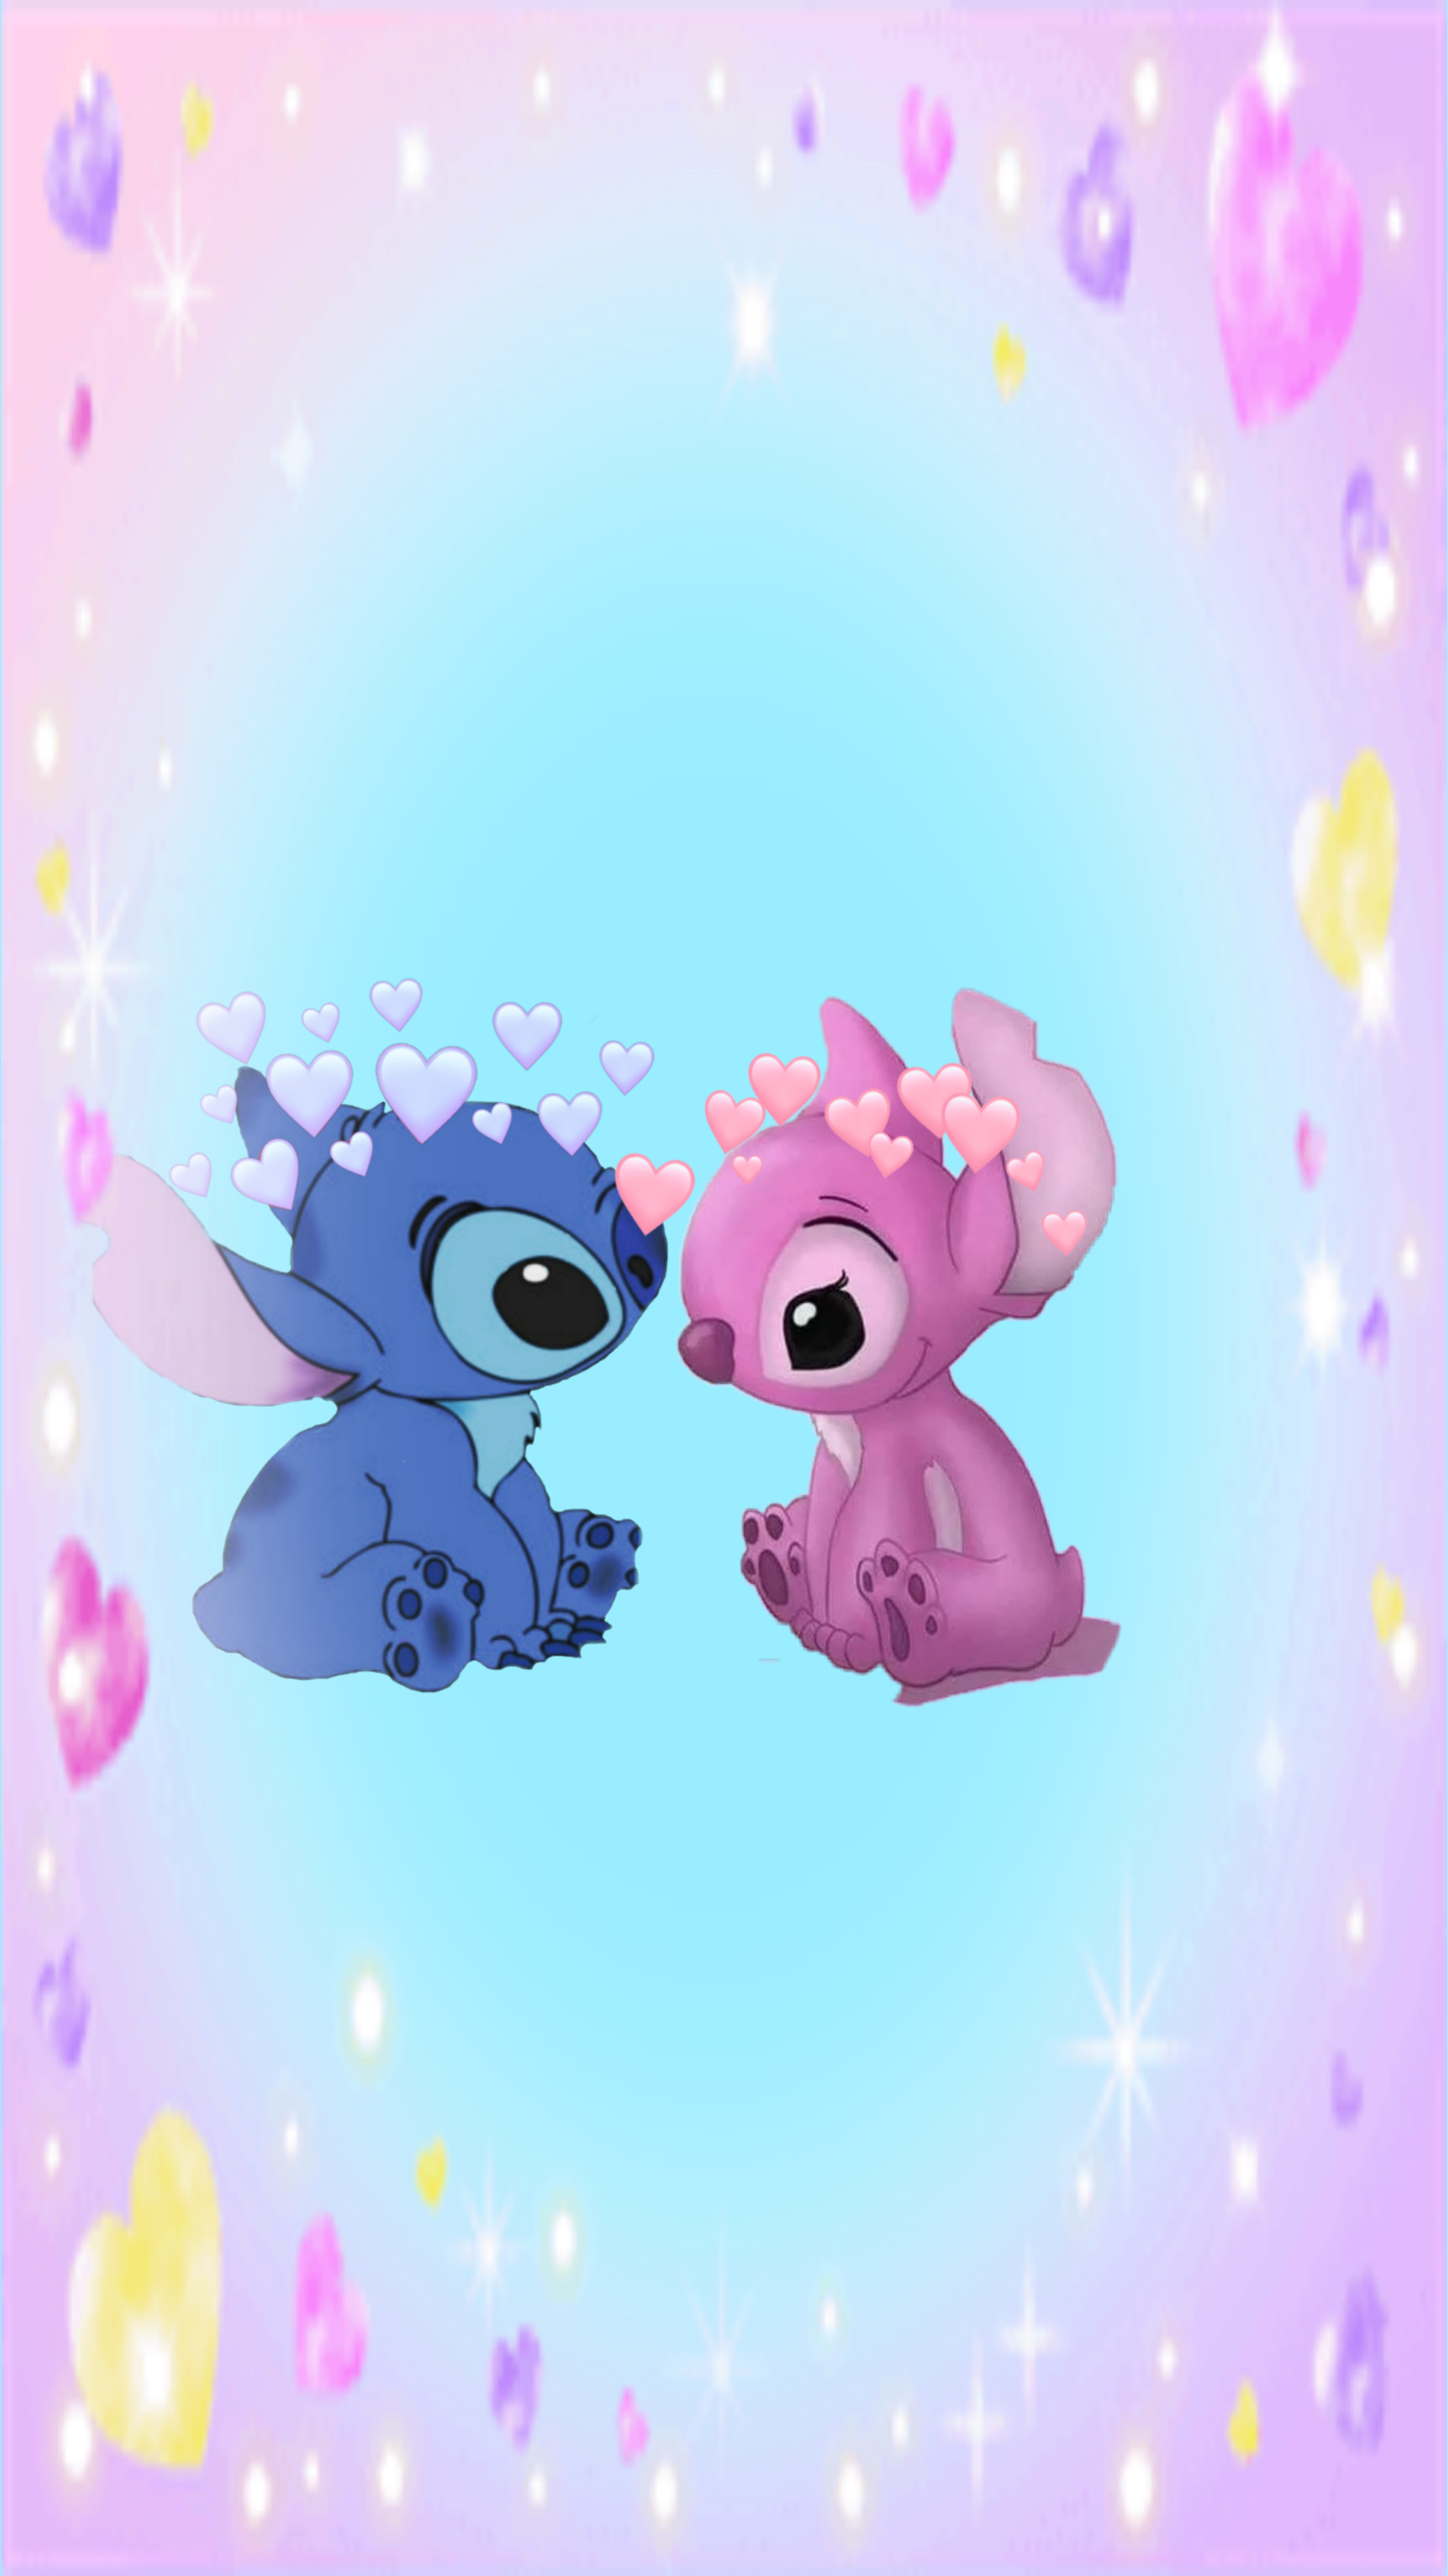 Pink Stitch Wallpapers